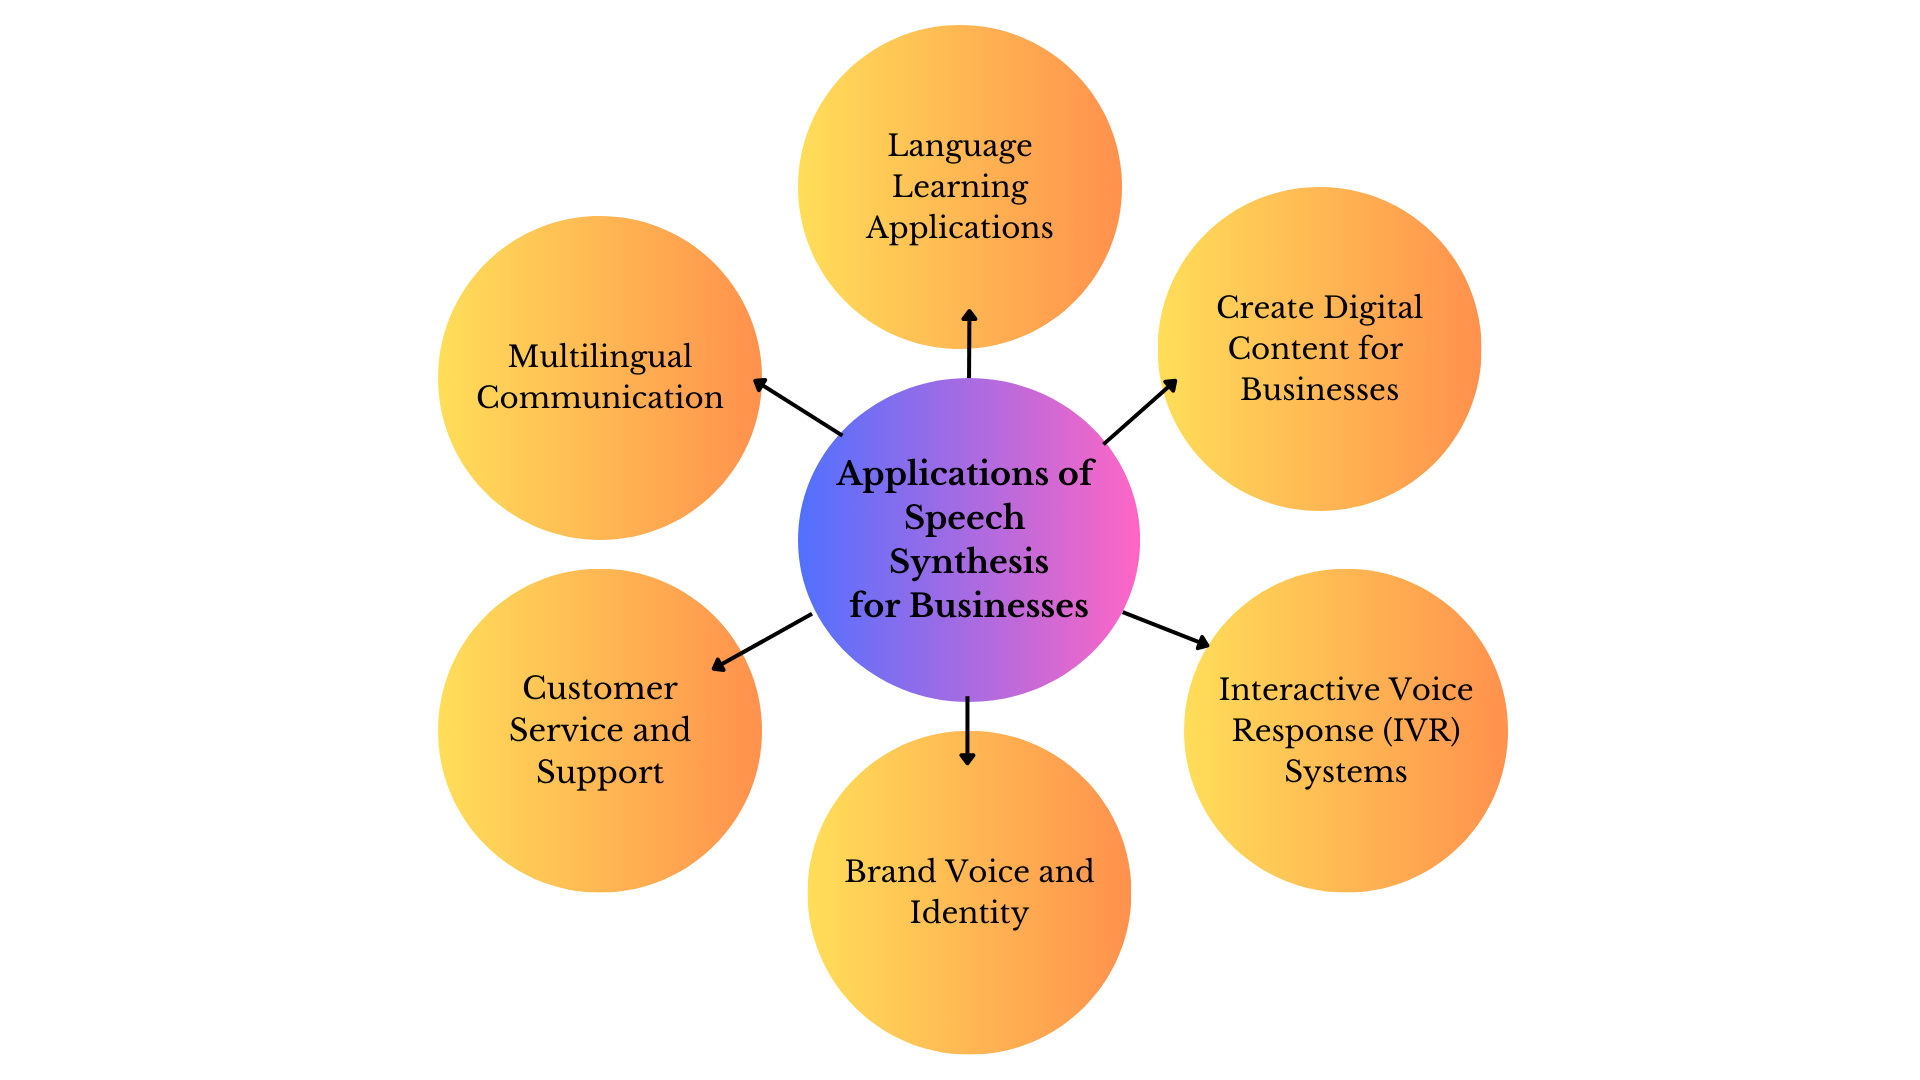 Applications-of-Speech-Synthesis-for-Businesses